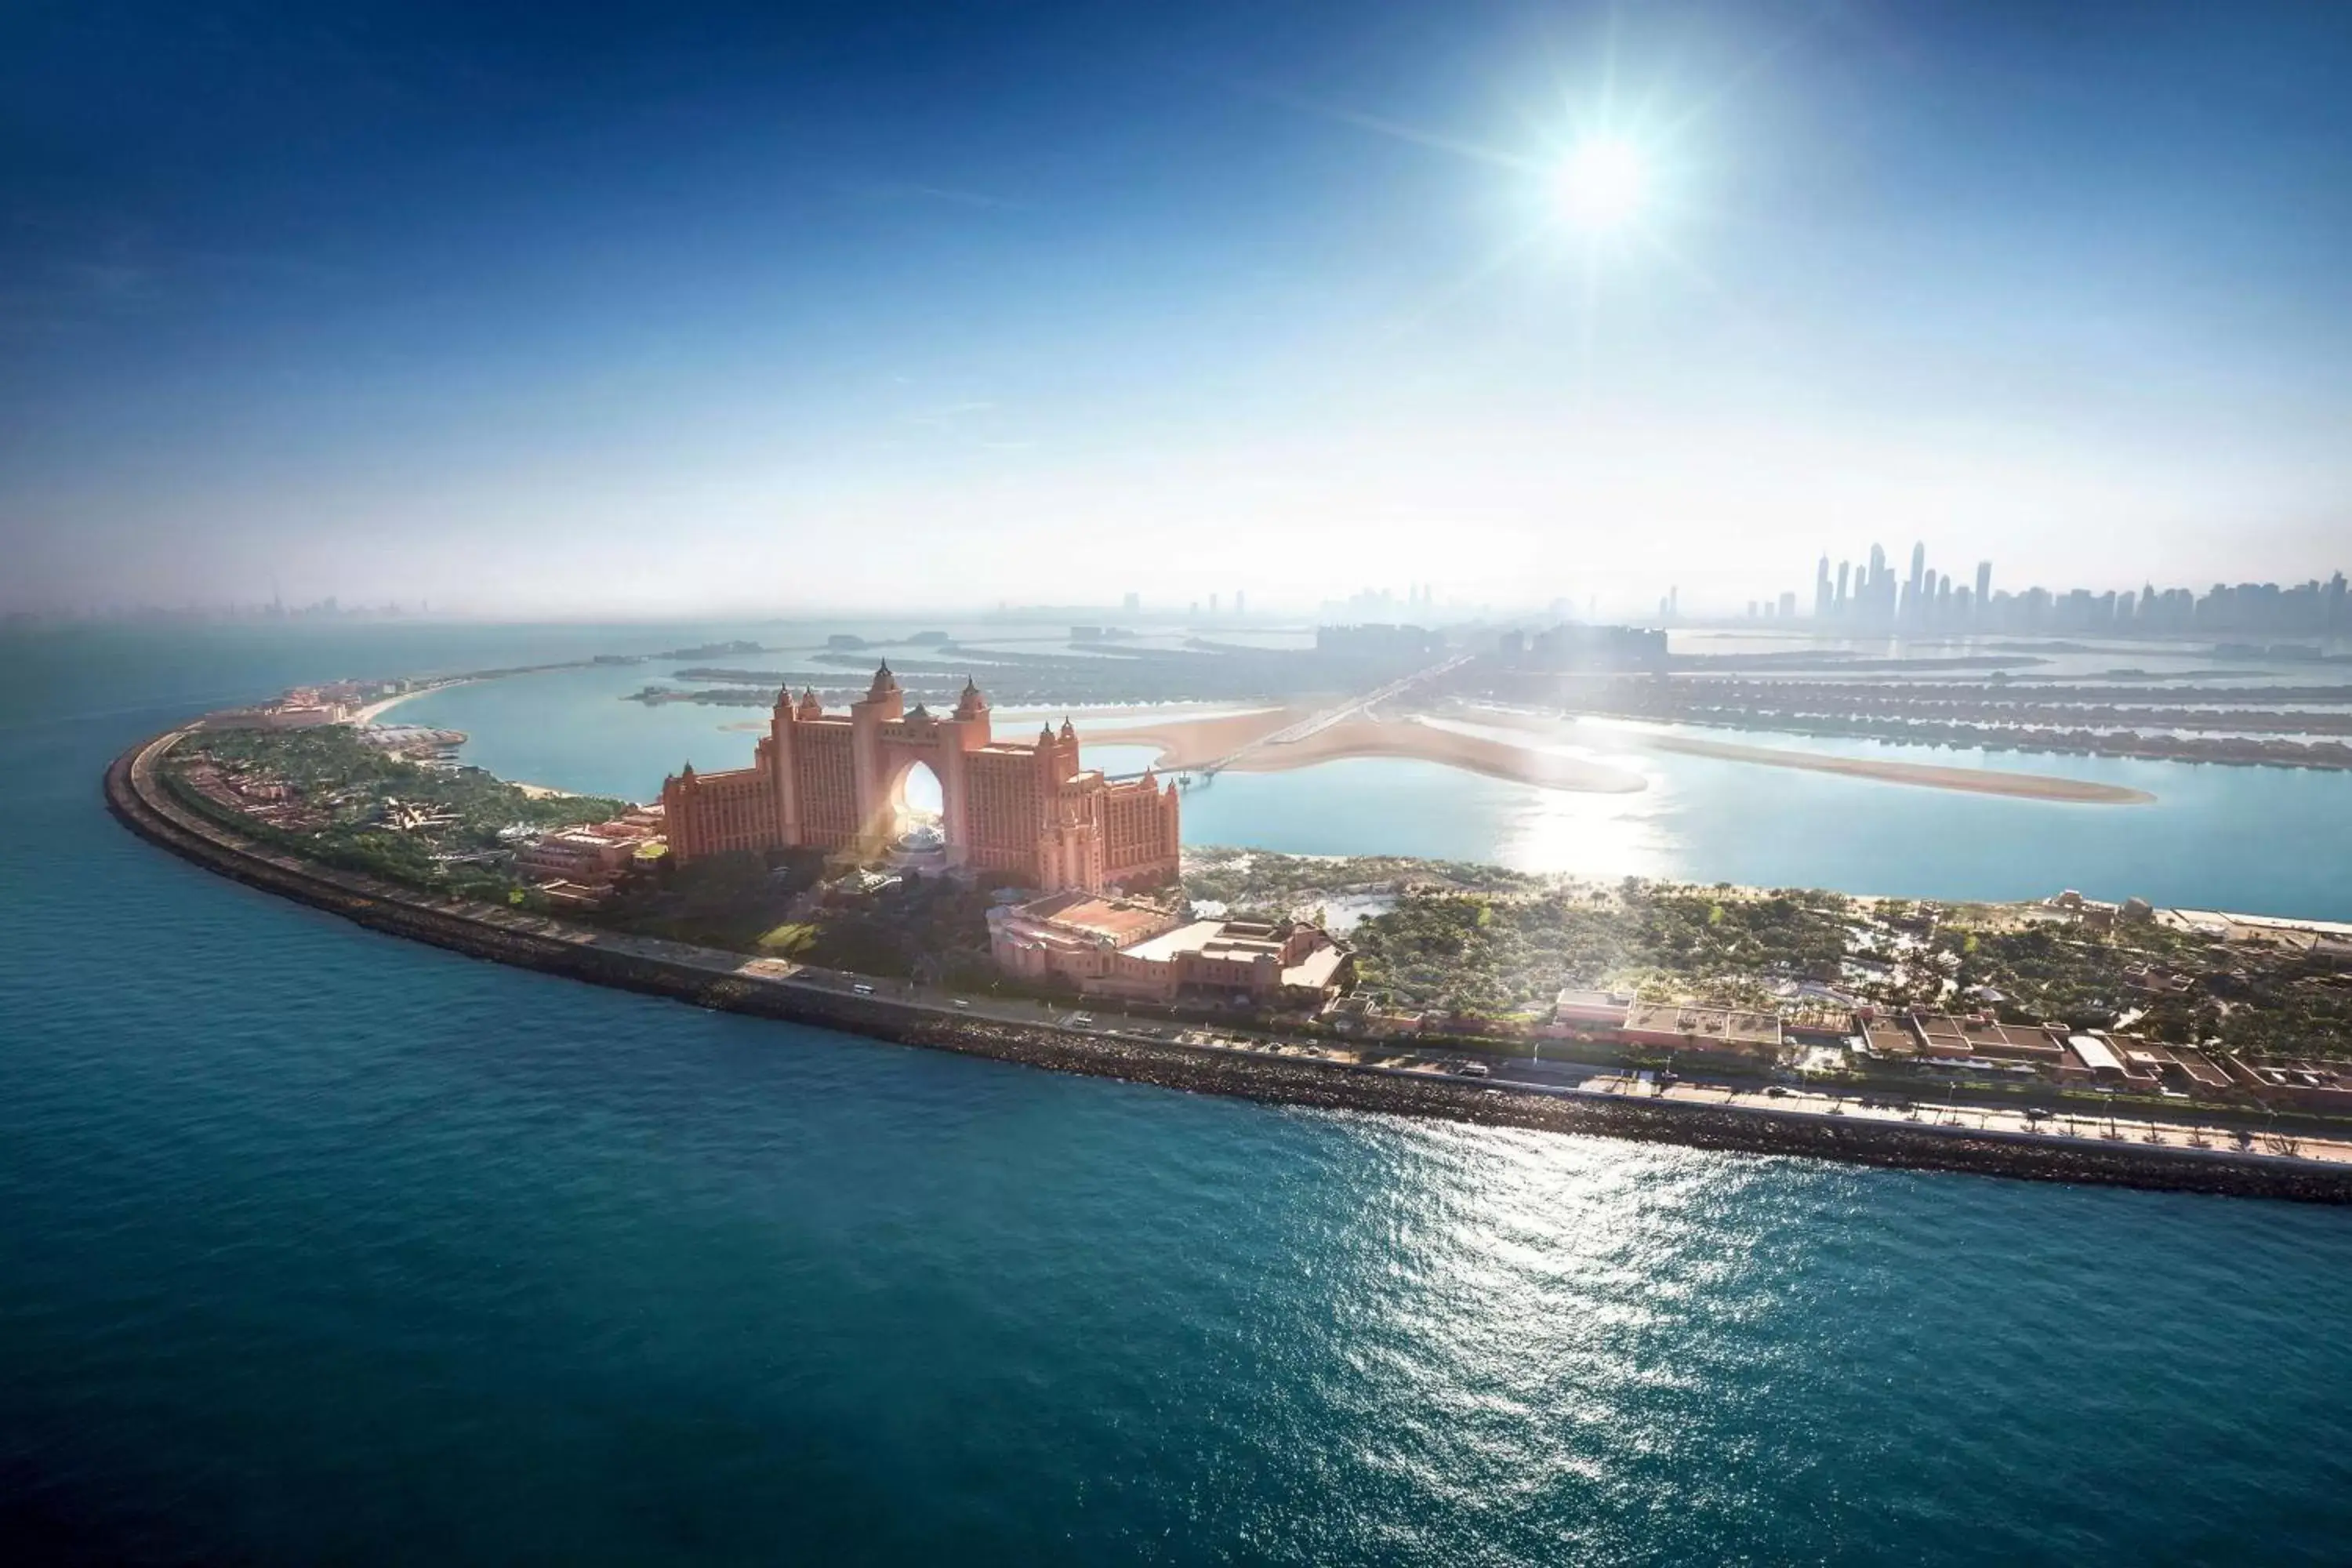 Property building in Atlantis, The Palm